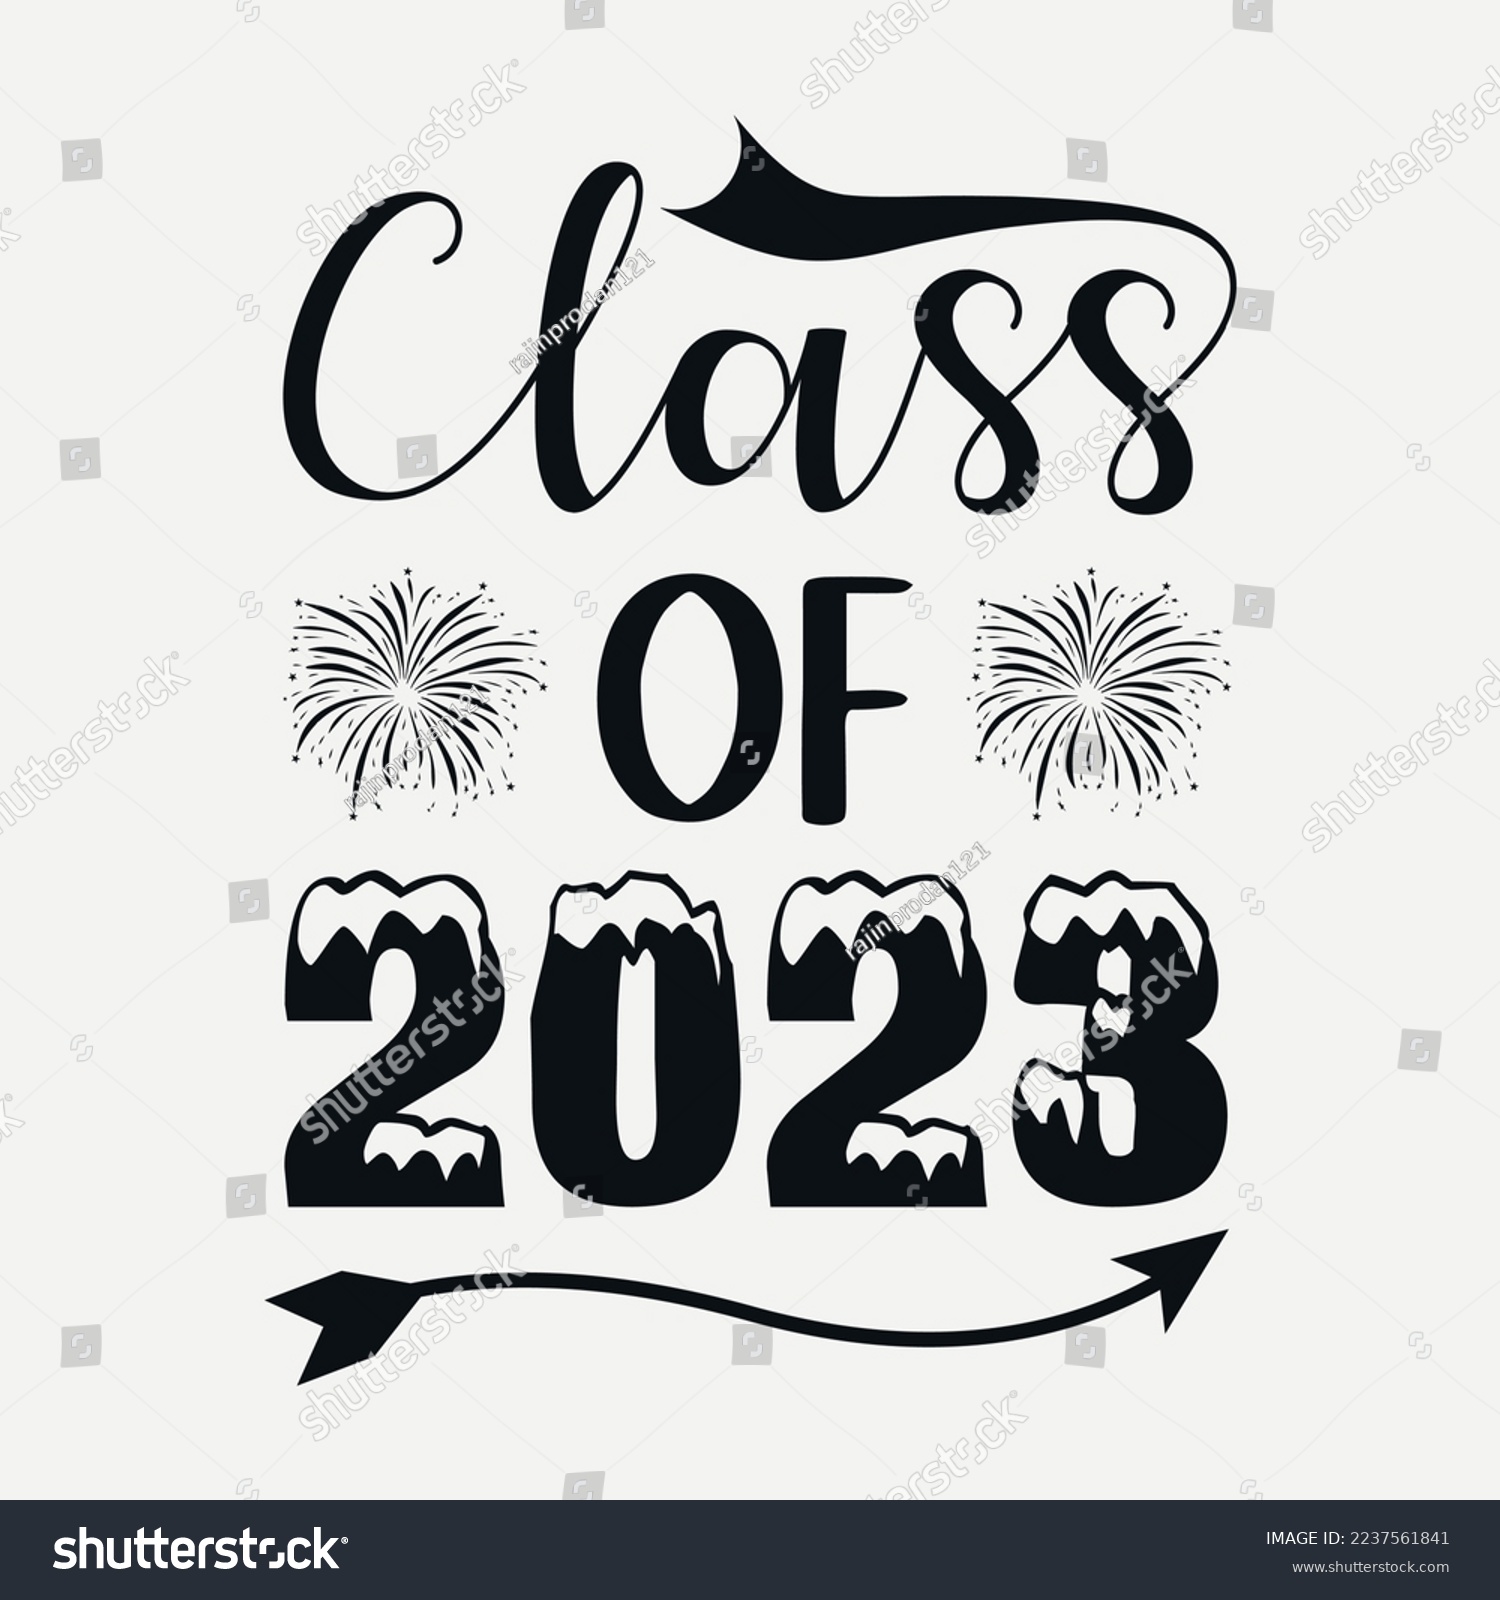 SVG of Class of 2023 svg quotes desig, Happy new year 2023 svg design, new year tshirt Design, new year quote with typography for t-shirt, card, mug etc svg